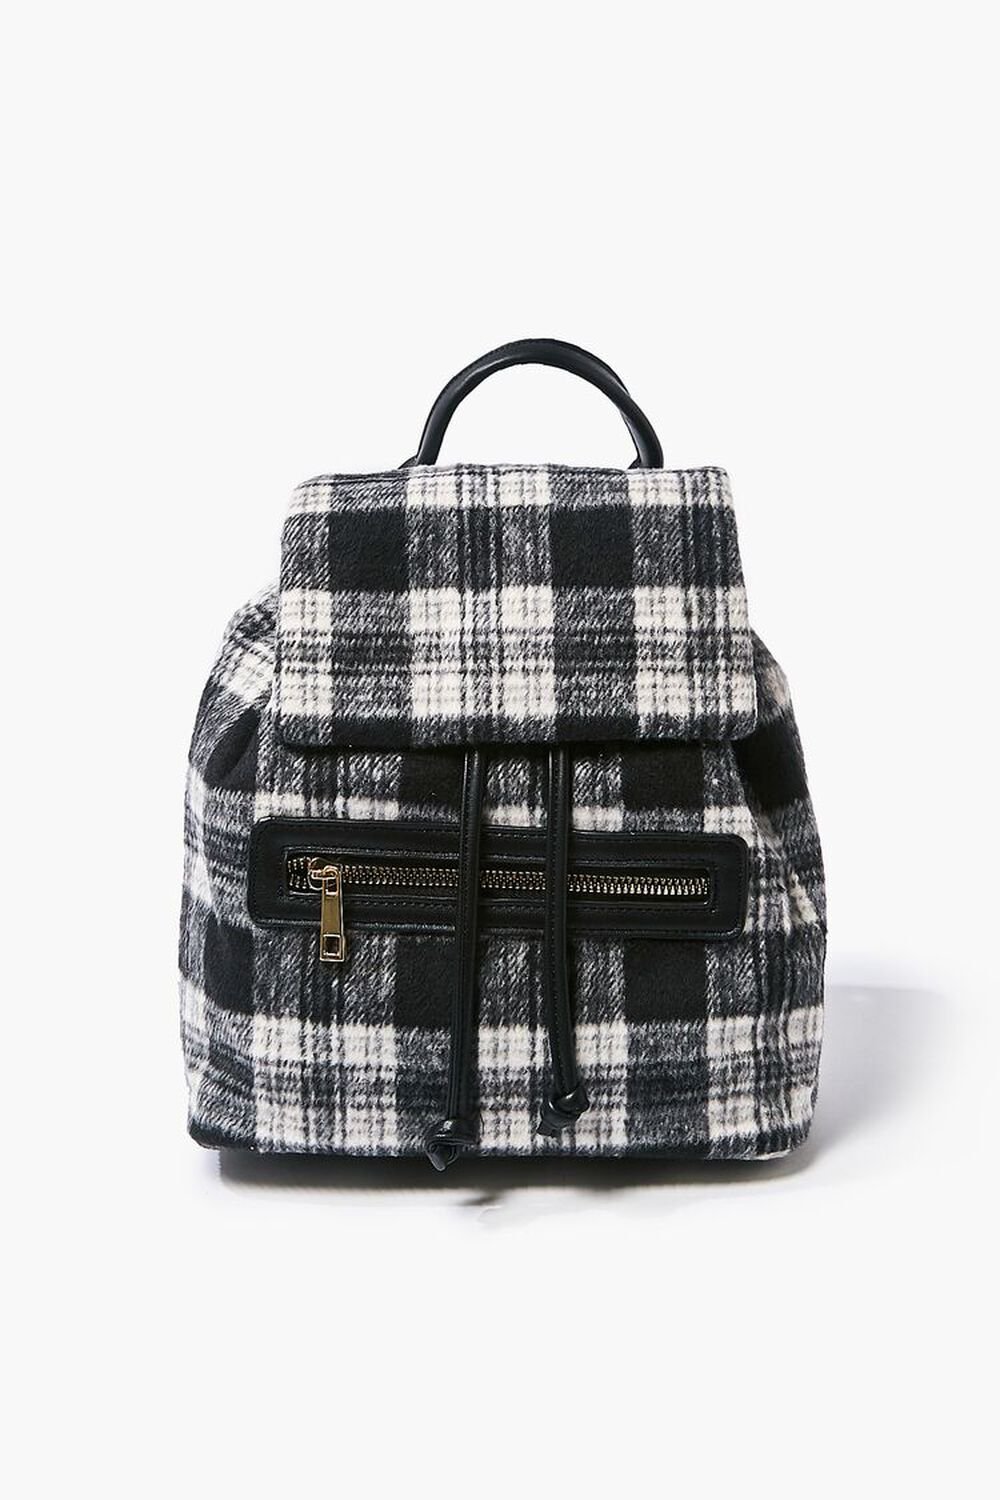 Plaid Chain-Strap Backpack, image 1